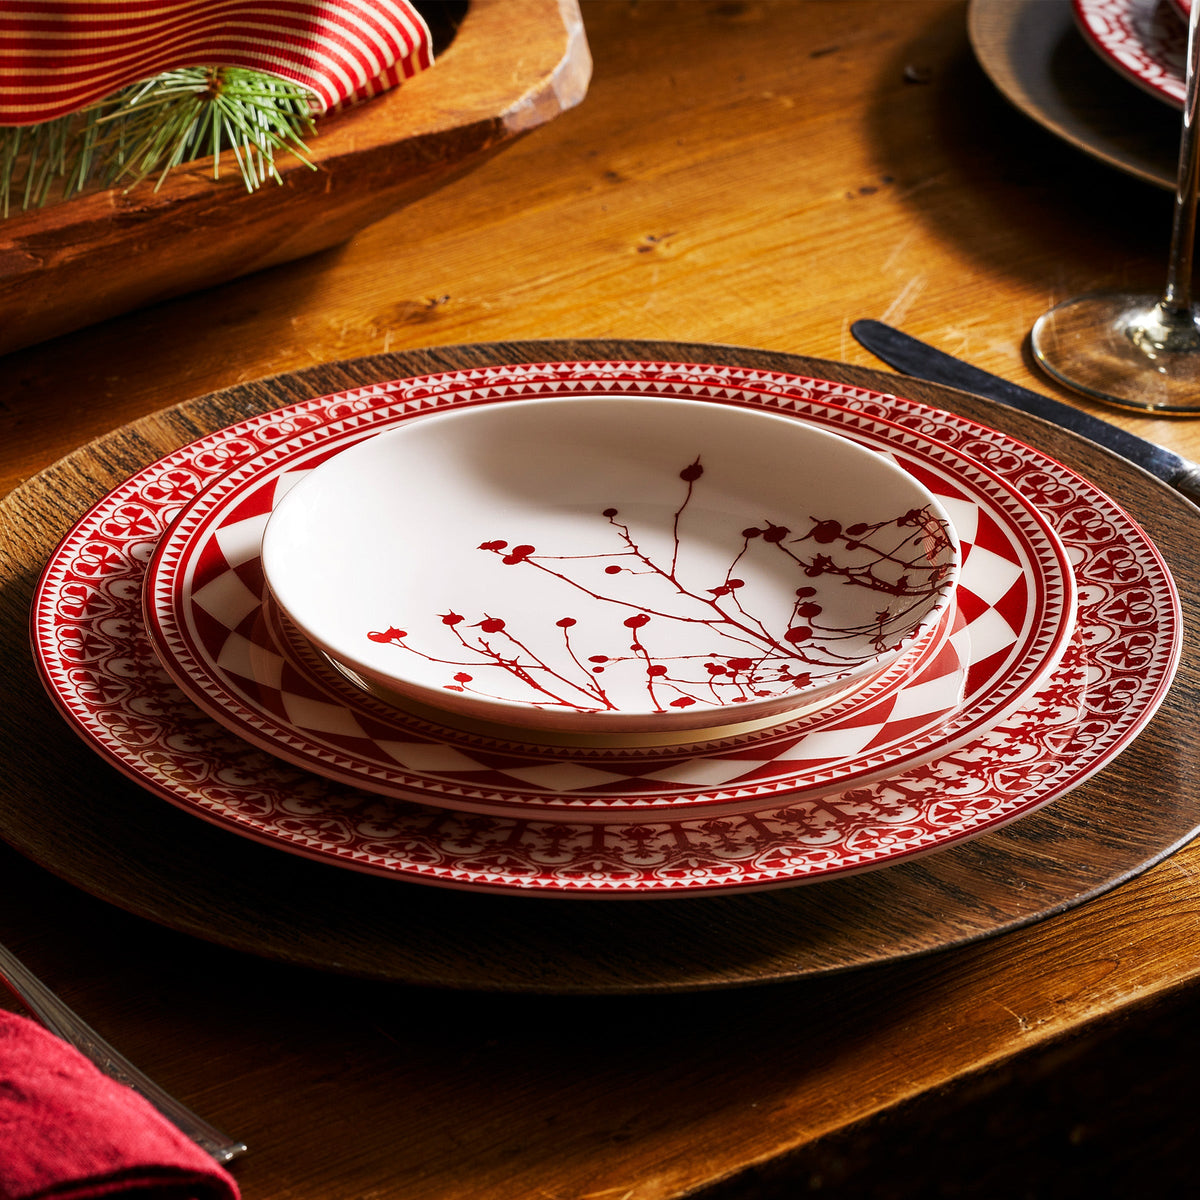 A neatly set wooden table showcases three stacked Fez Crimson Rimmed Salad Plates by Caskata Artisanal Home featuring intricate Moroccan patterns in red and white, accompanied by a fork and knife on the right.